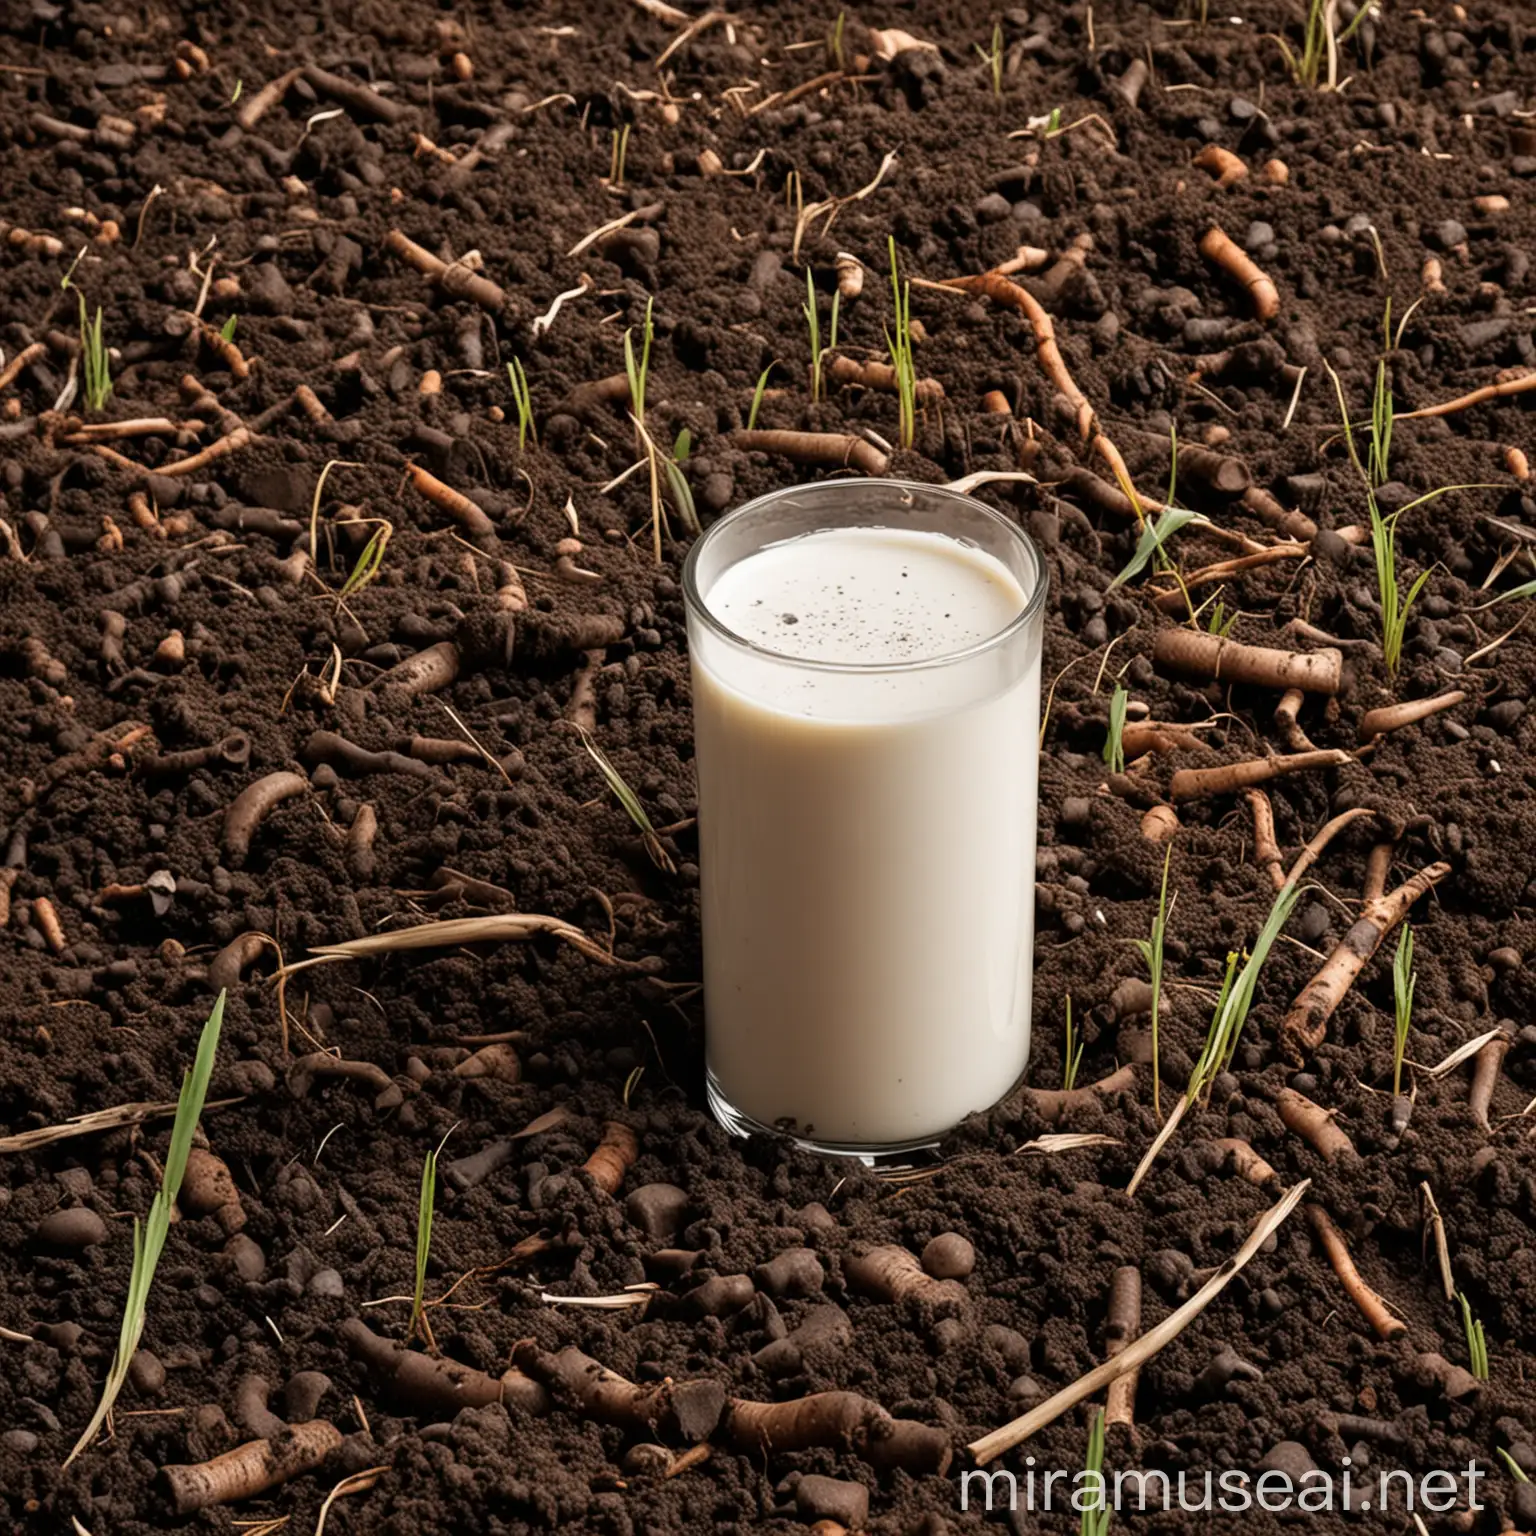 Healthy Soil Microbiome Nurtured by Grass and Milk